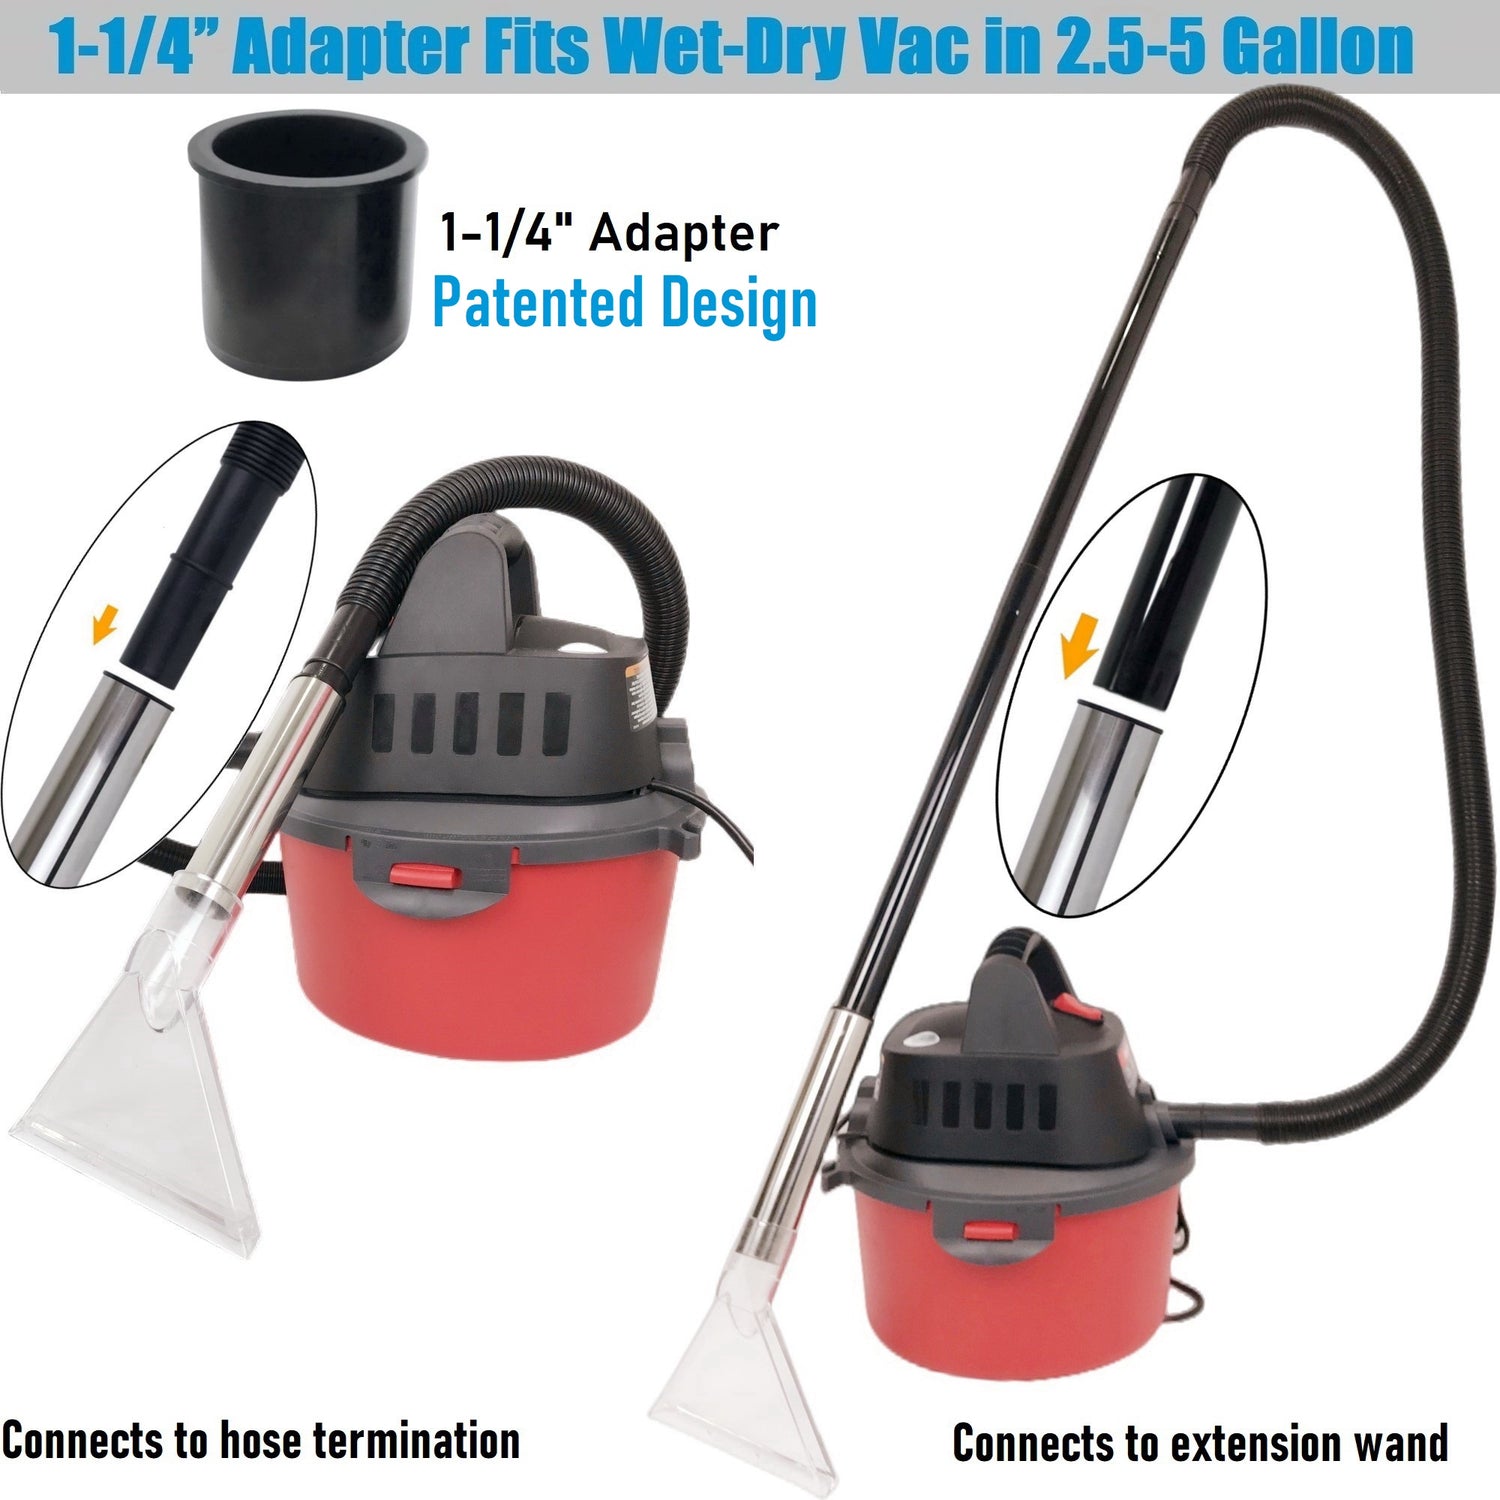 Shop Vac Extractor Attachment For Shop Vac in 2.5-9 Gallon with 7-1/2  Clear Head for Upholstery & Carpet Cleaning